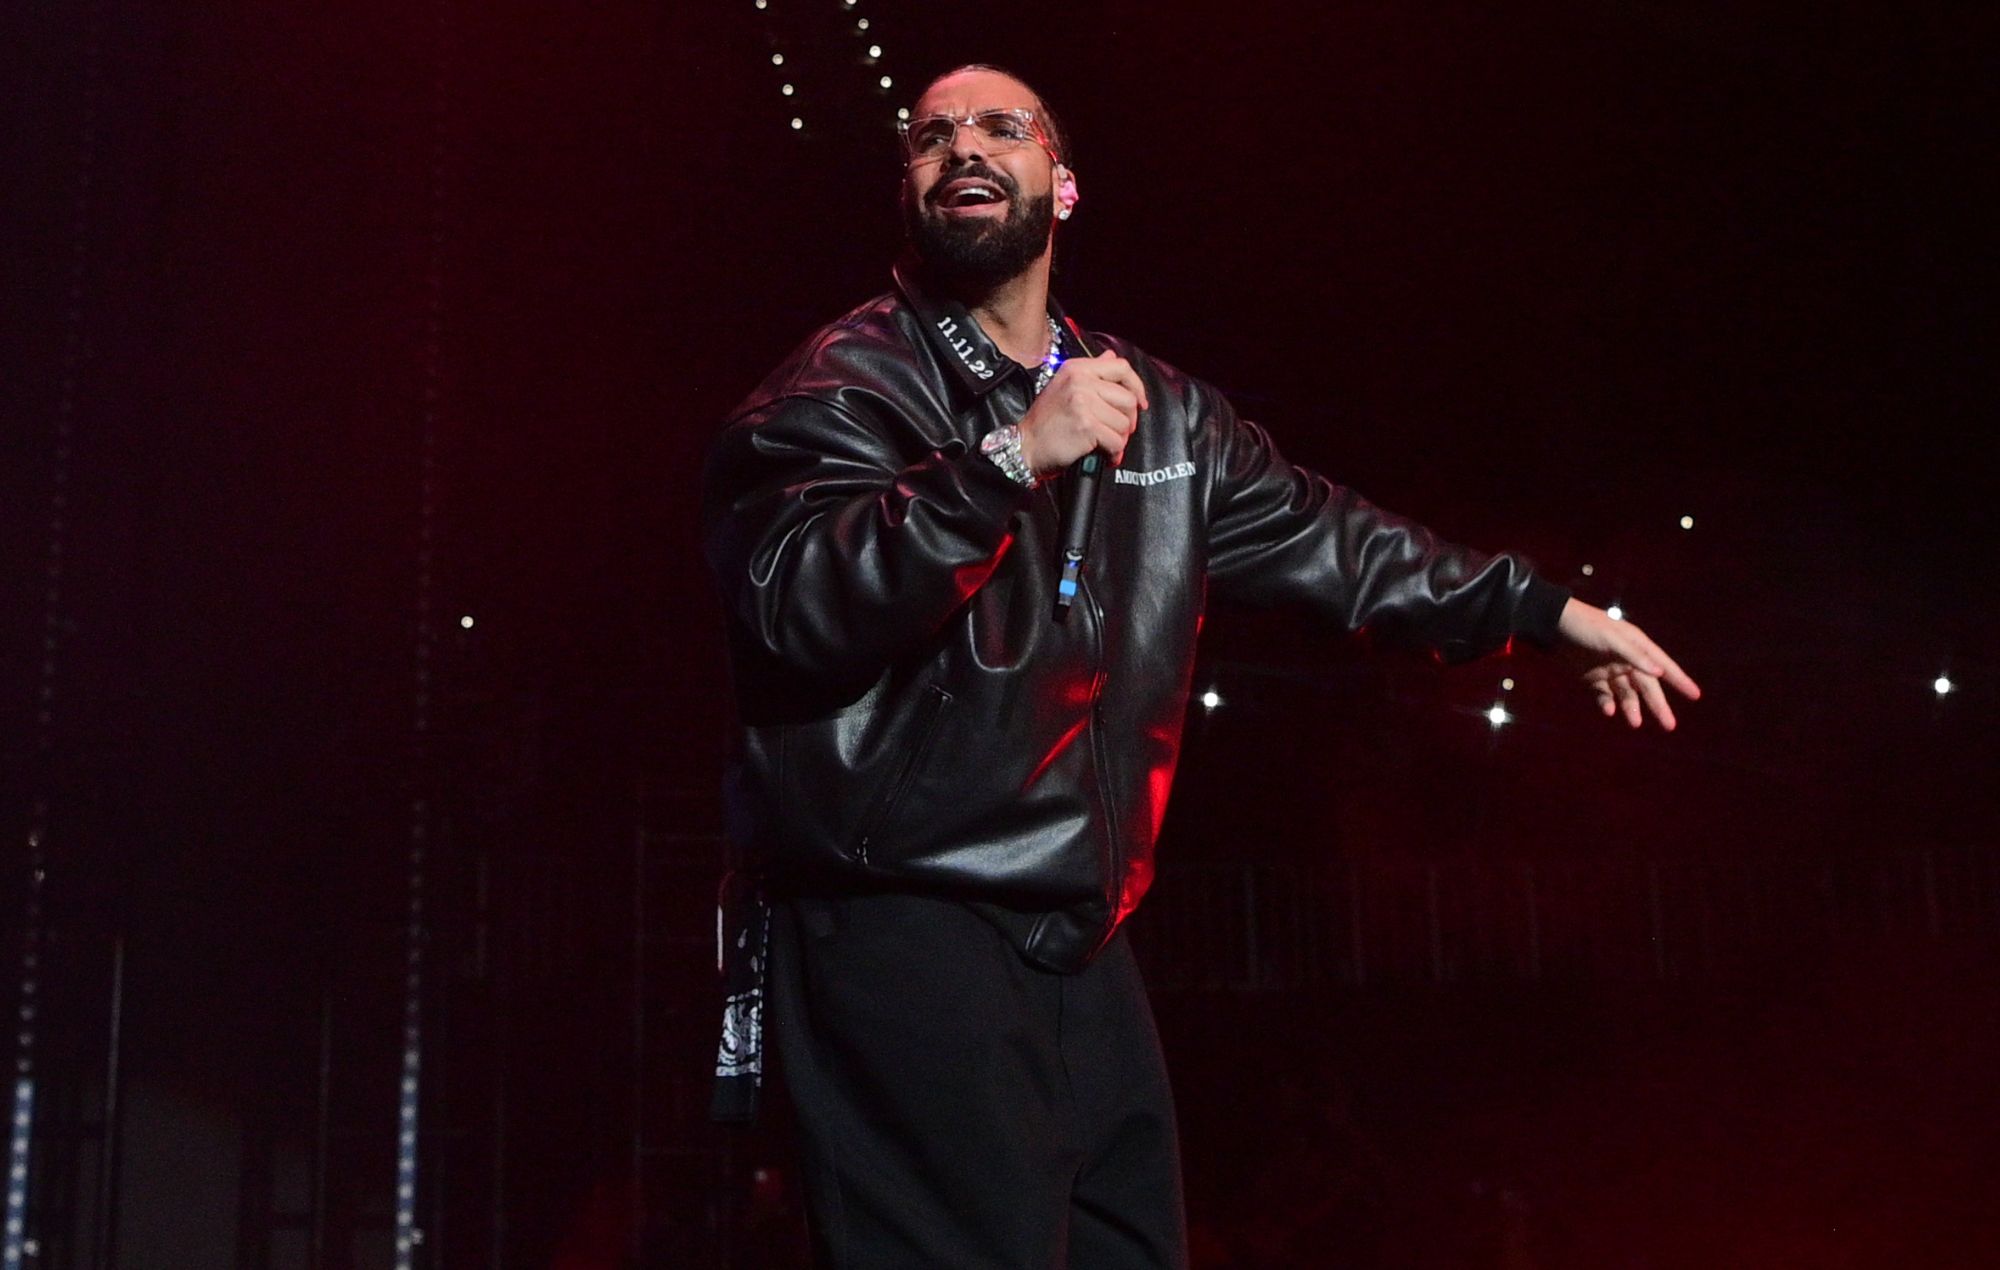 Man arrested for breaking into Drake’s mansion day after shooting